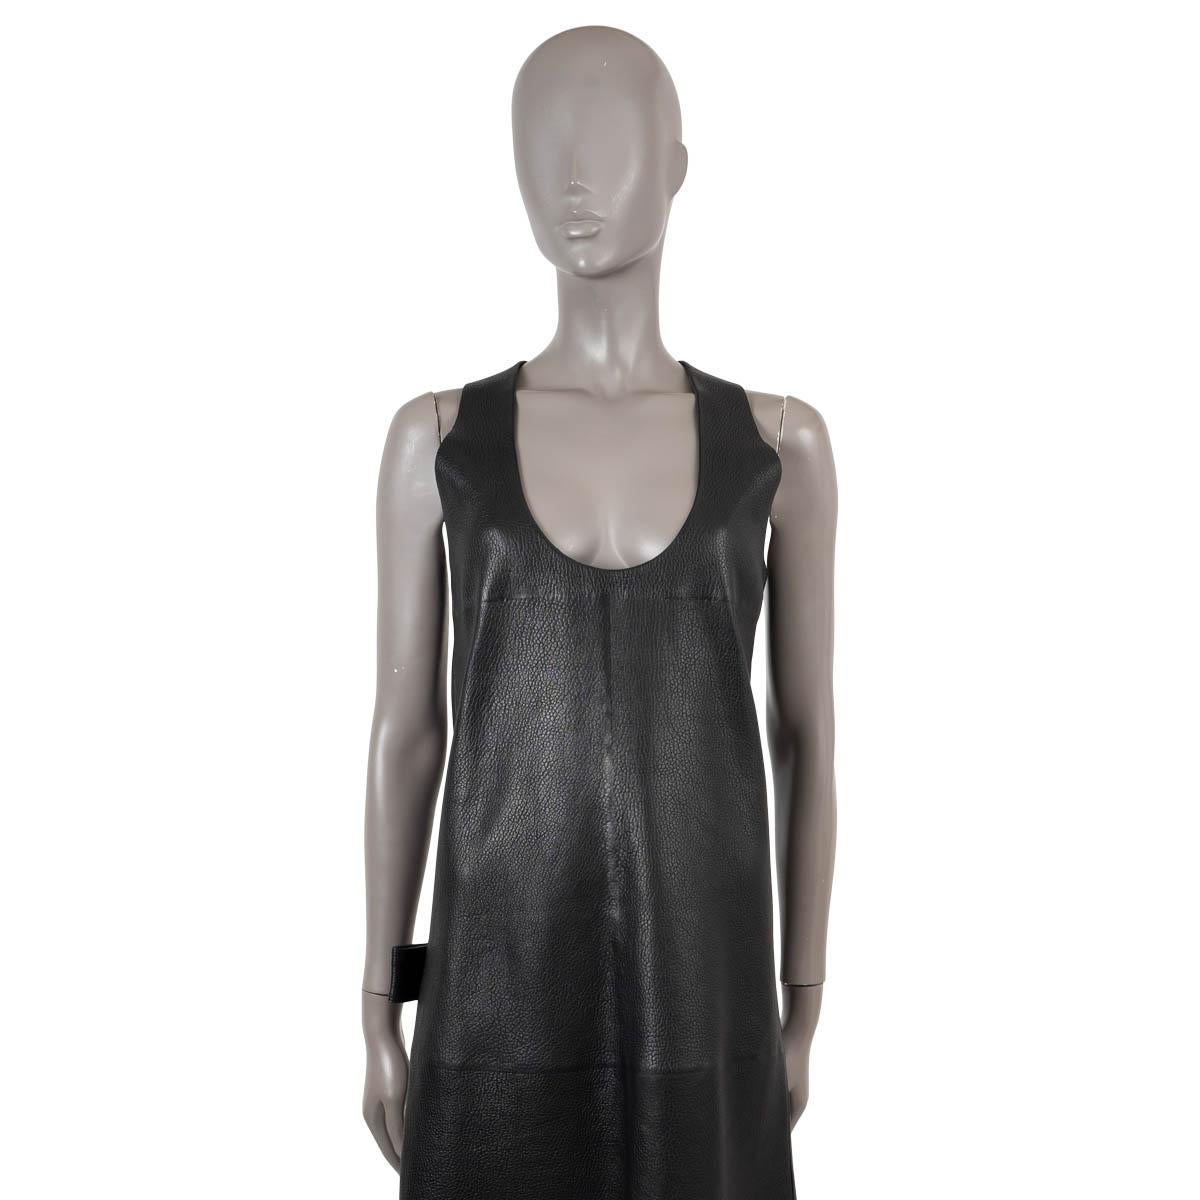 100% authentic Bottega Veneta sleeveless shift dress in black grained lambskin leather. Features a scoop neck and a patch pocket on the back. Opens with a concealed zipper in the back and is lined in cotton (100%). Has been worn and is in excellent